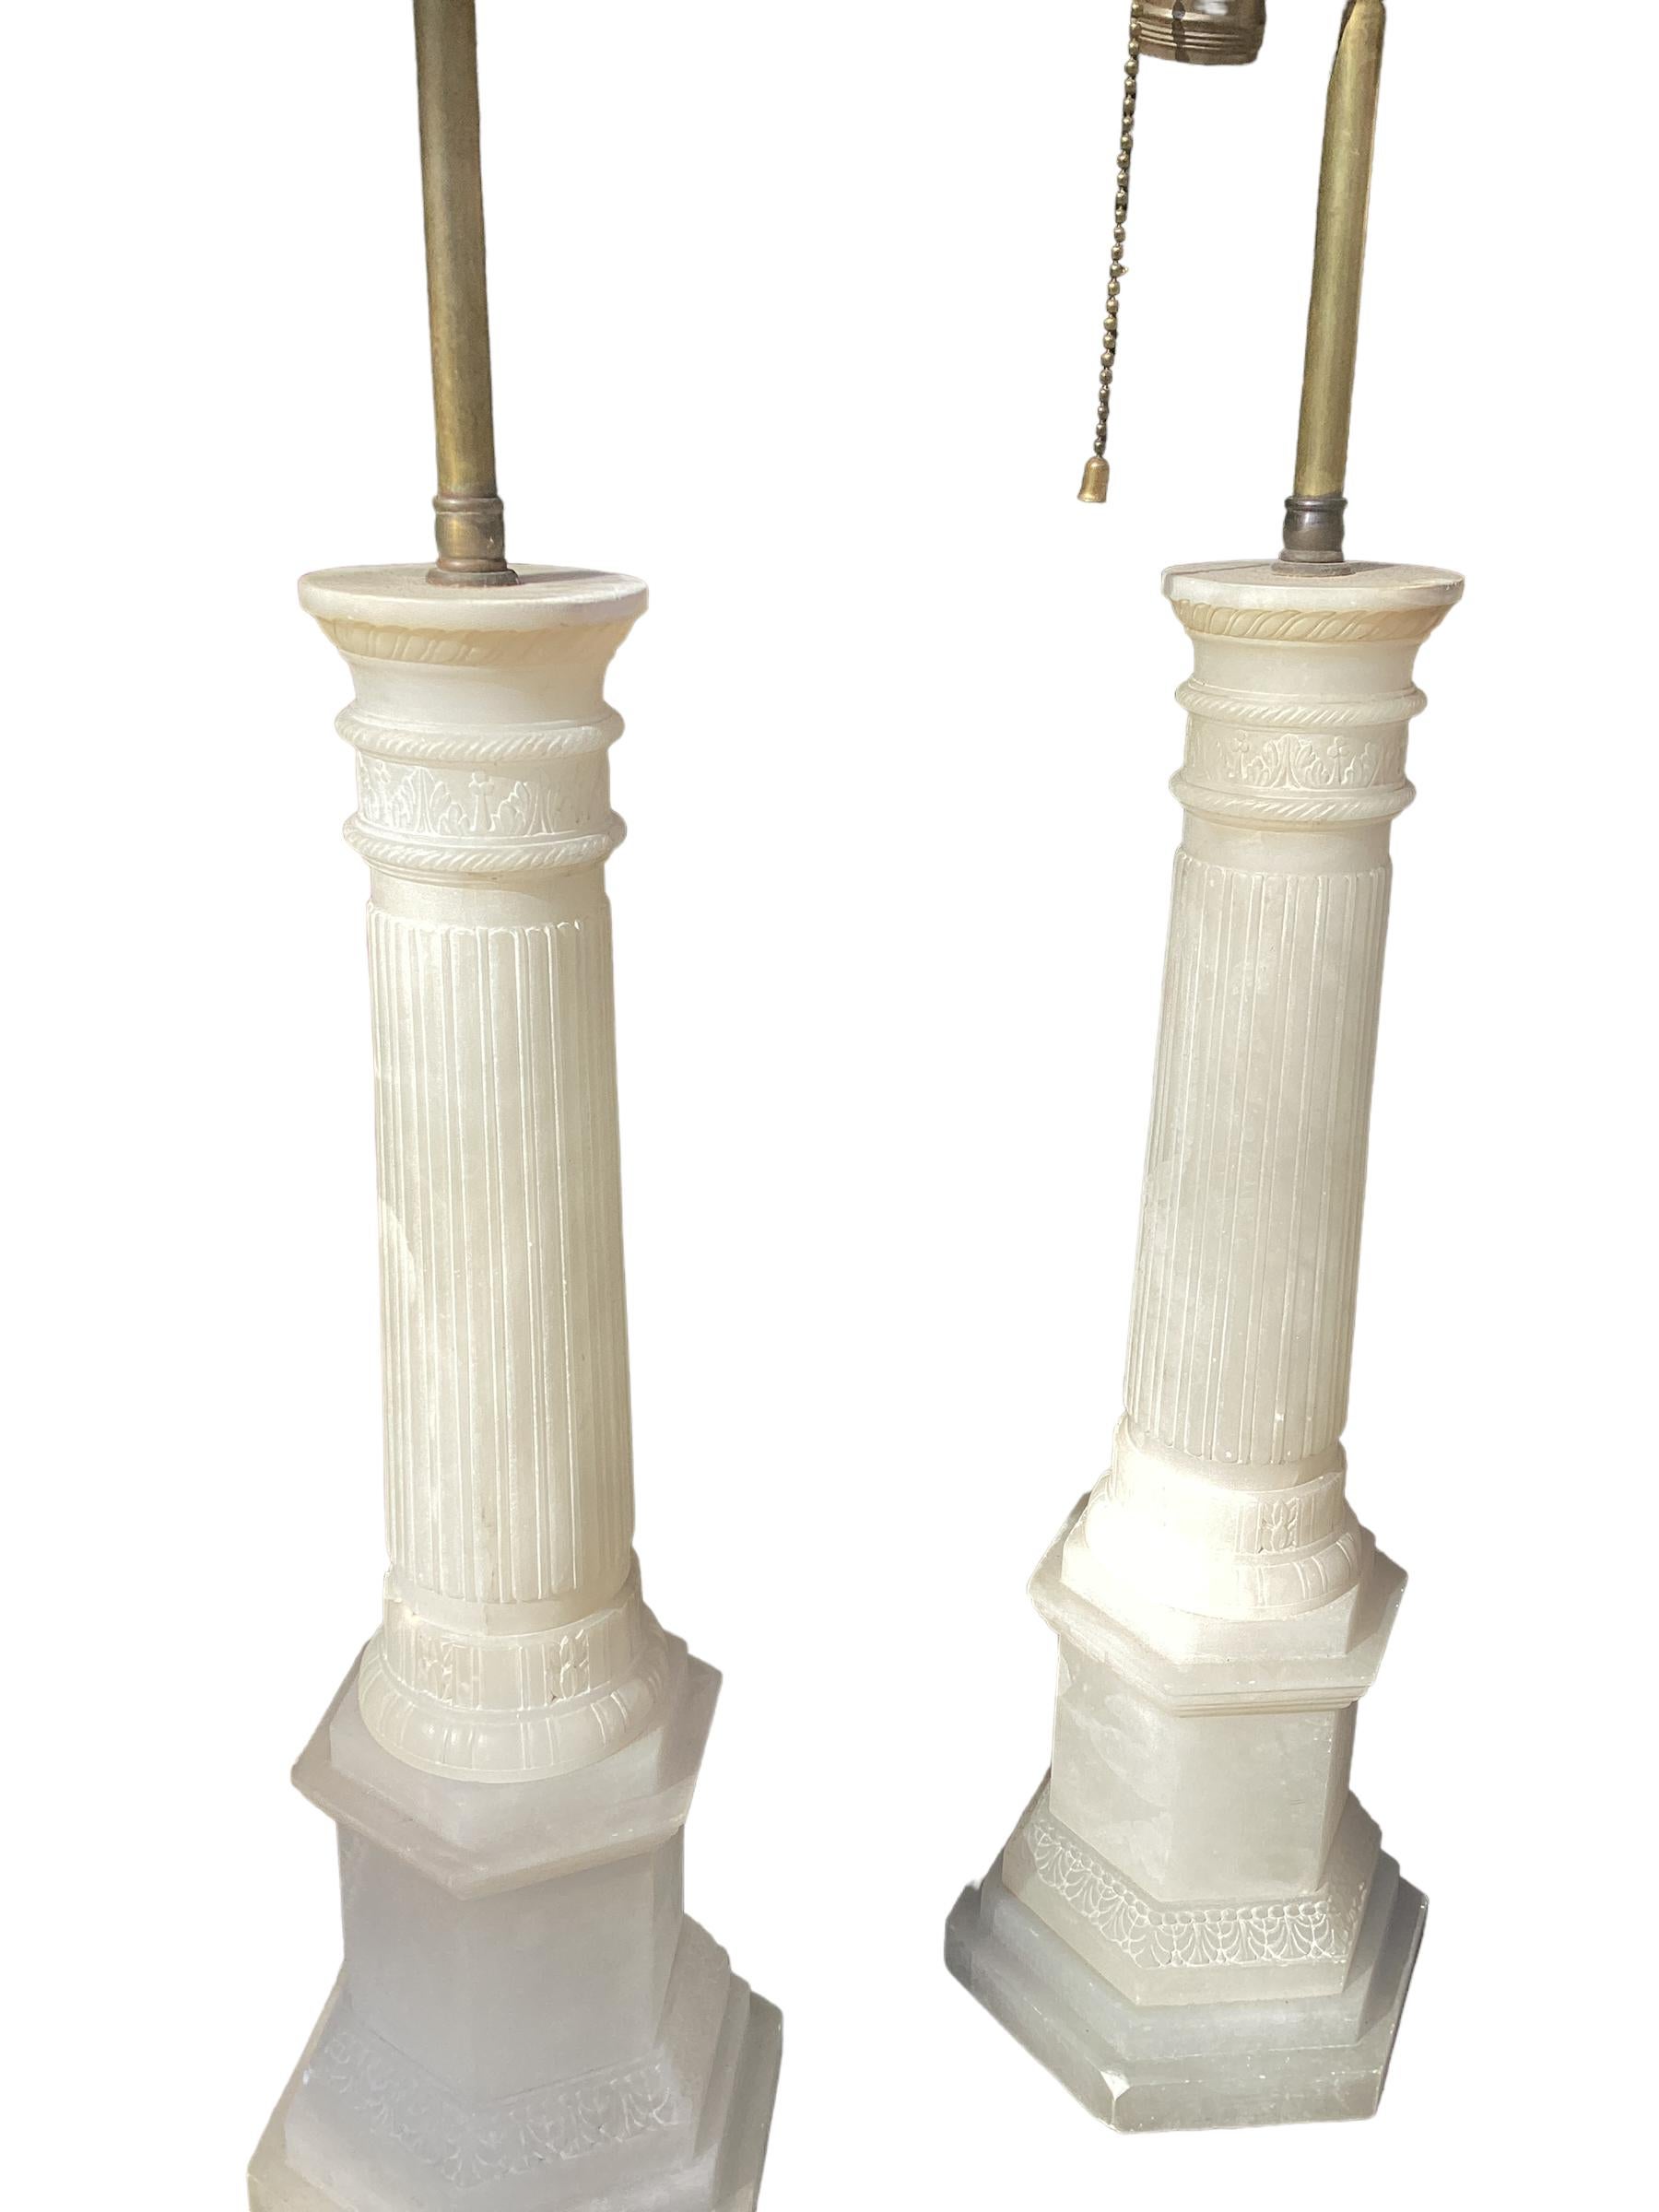 Pair of Italian Alabaster Column Lamps. Each with a reeded column with round capitals and sitting atop a hexagonal shaped plinth base. The top of the double cluster socket has an adjustable pipe that allows the shade to be raised an additional 2